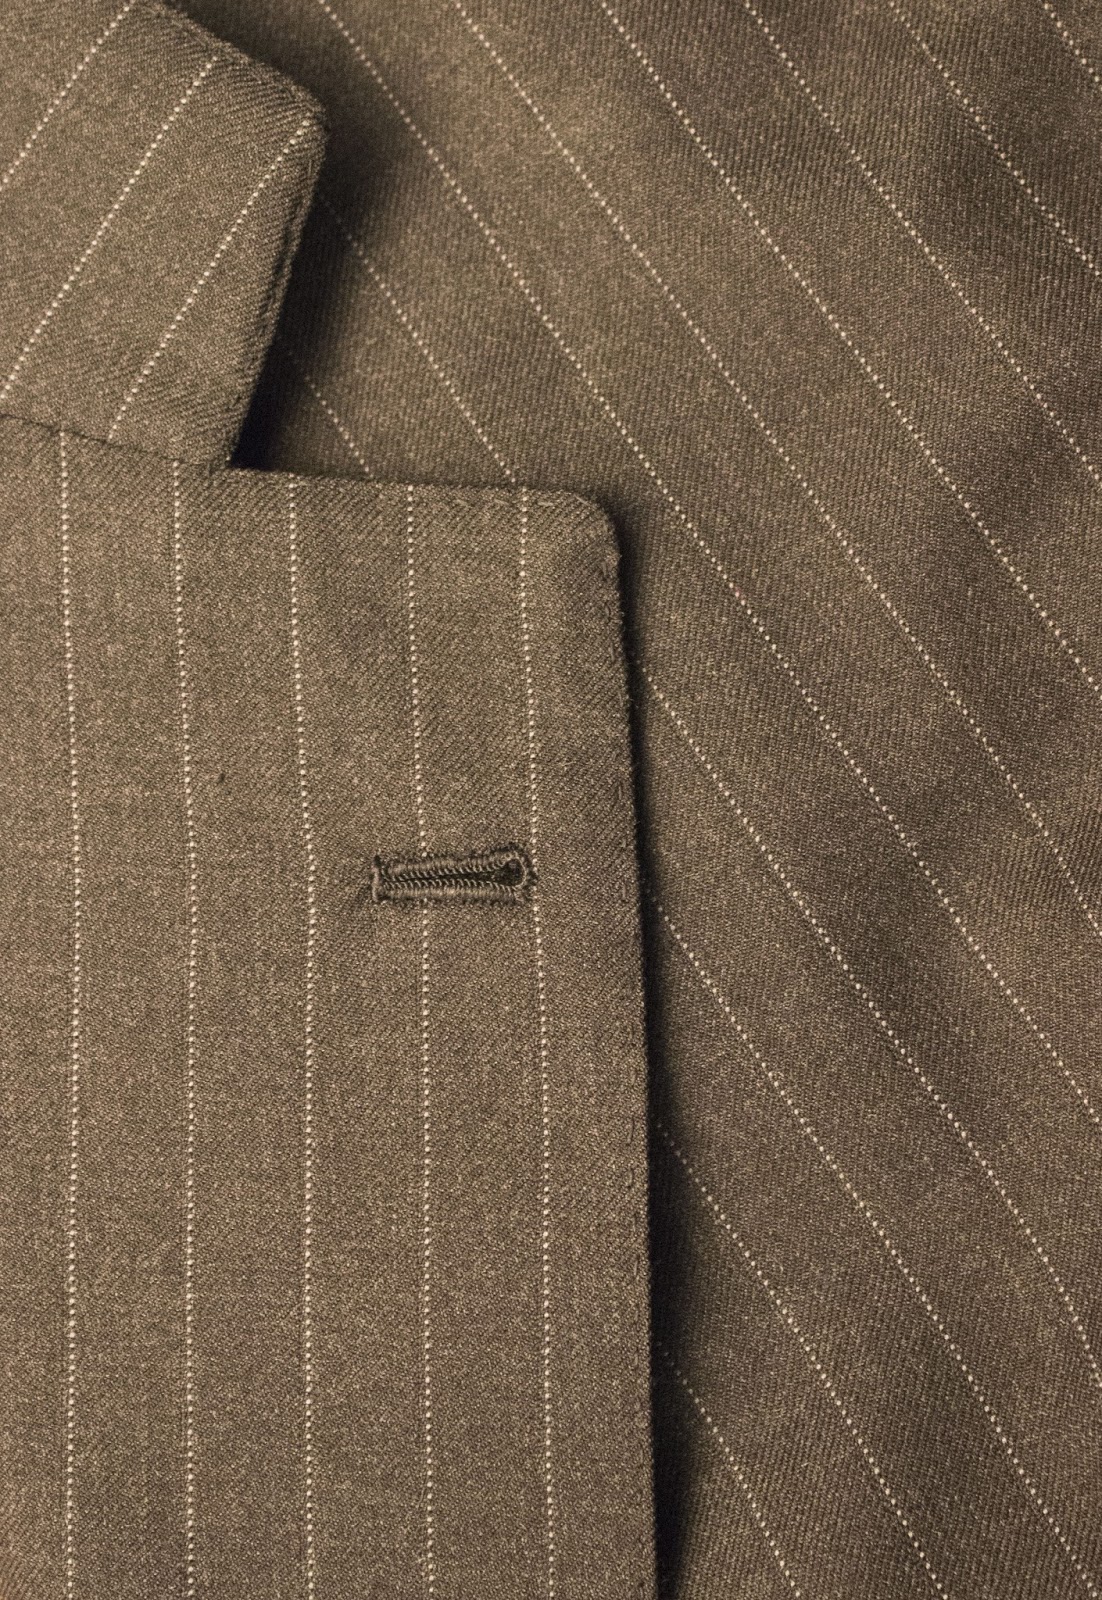 Made by Hand- the great Sartorial Debate: Menefreghismo